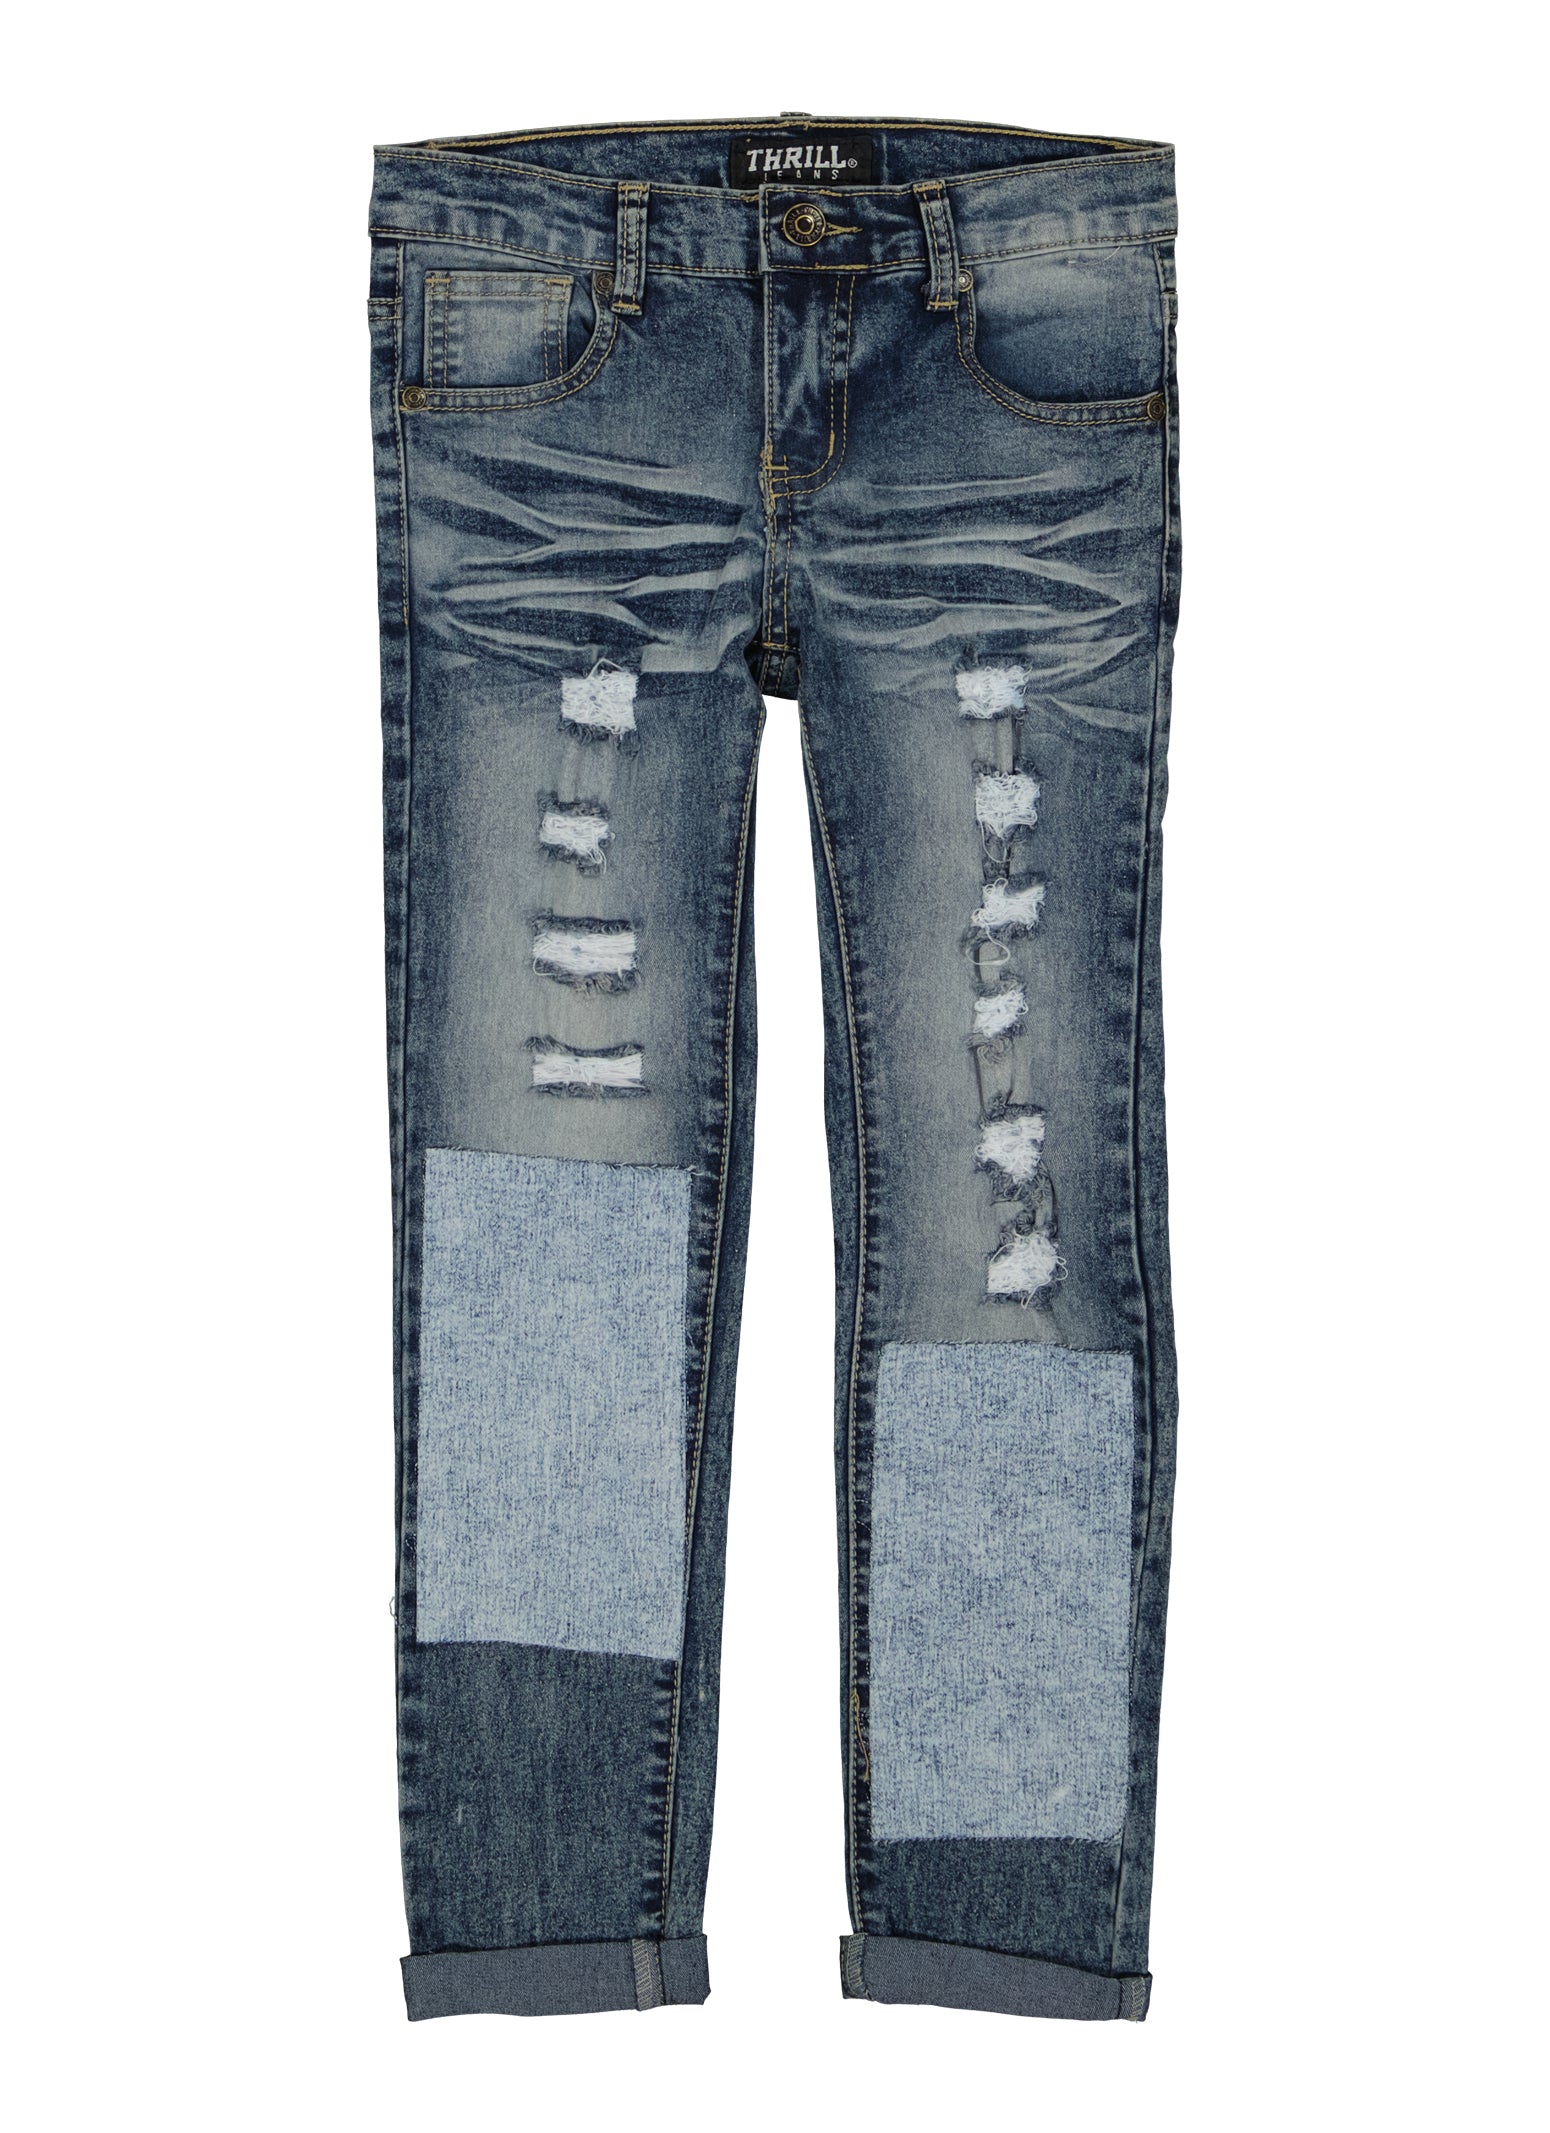 Girls Distressed Patchwork Jeans, Blue, Size 10